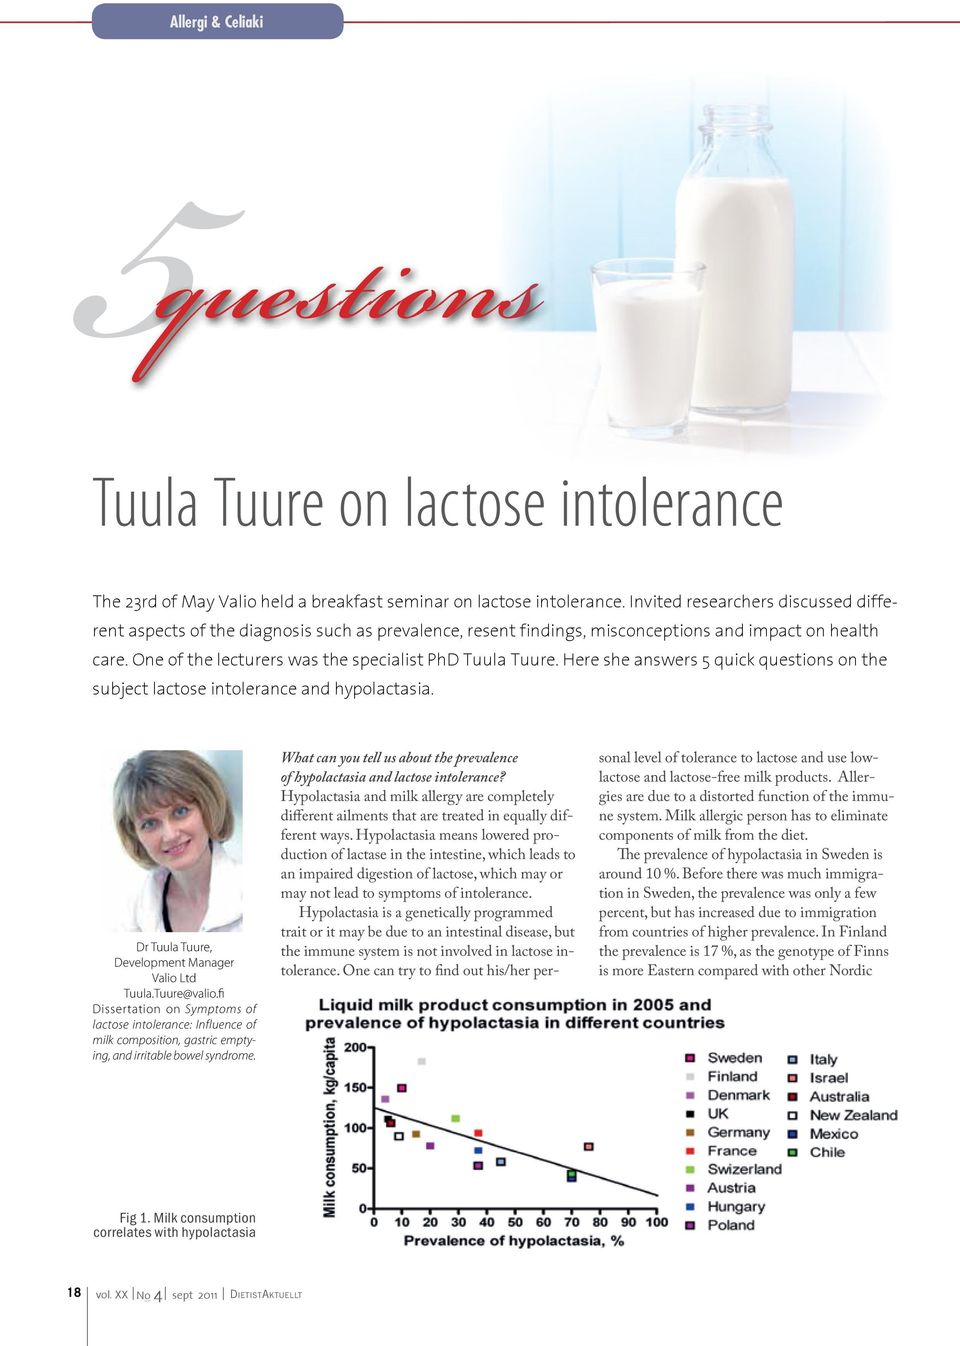 Here she answers 5 quick questions on the subject lactose intolerance and hypolactasia. Dr Tuula Tuure, Development Manager Valio Ltd Tuula.Tuure@valio.